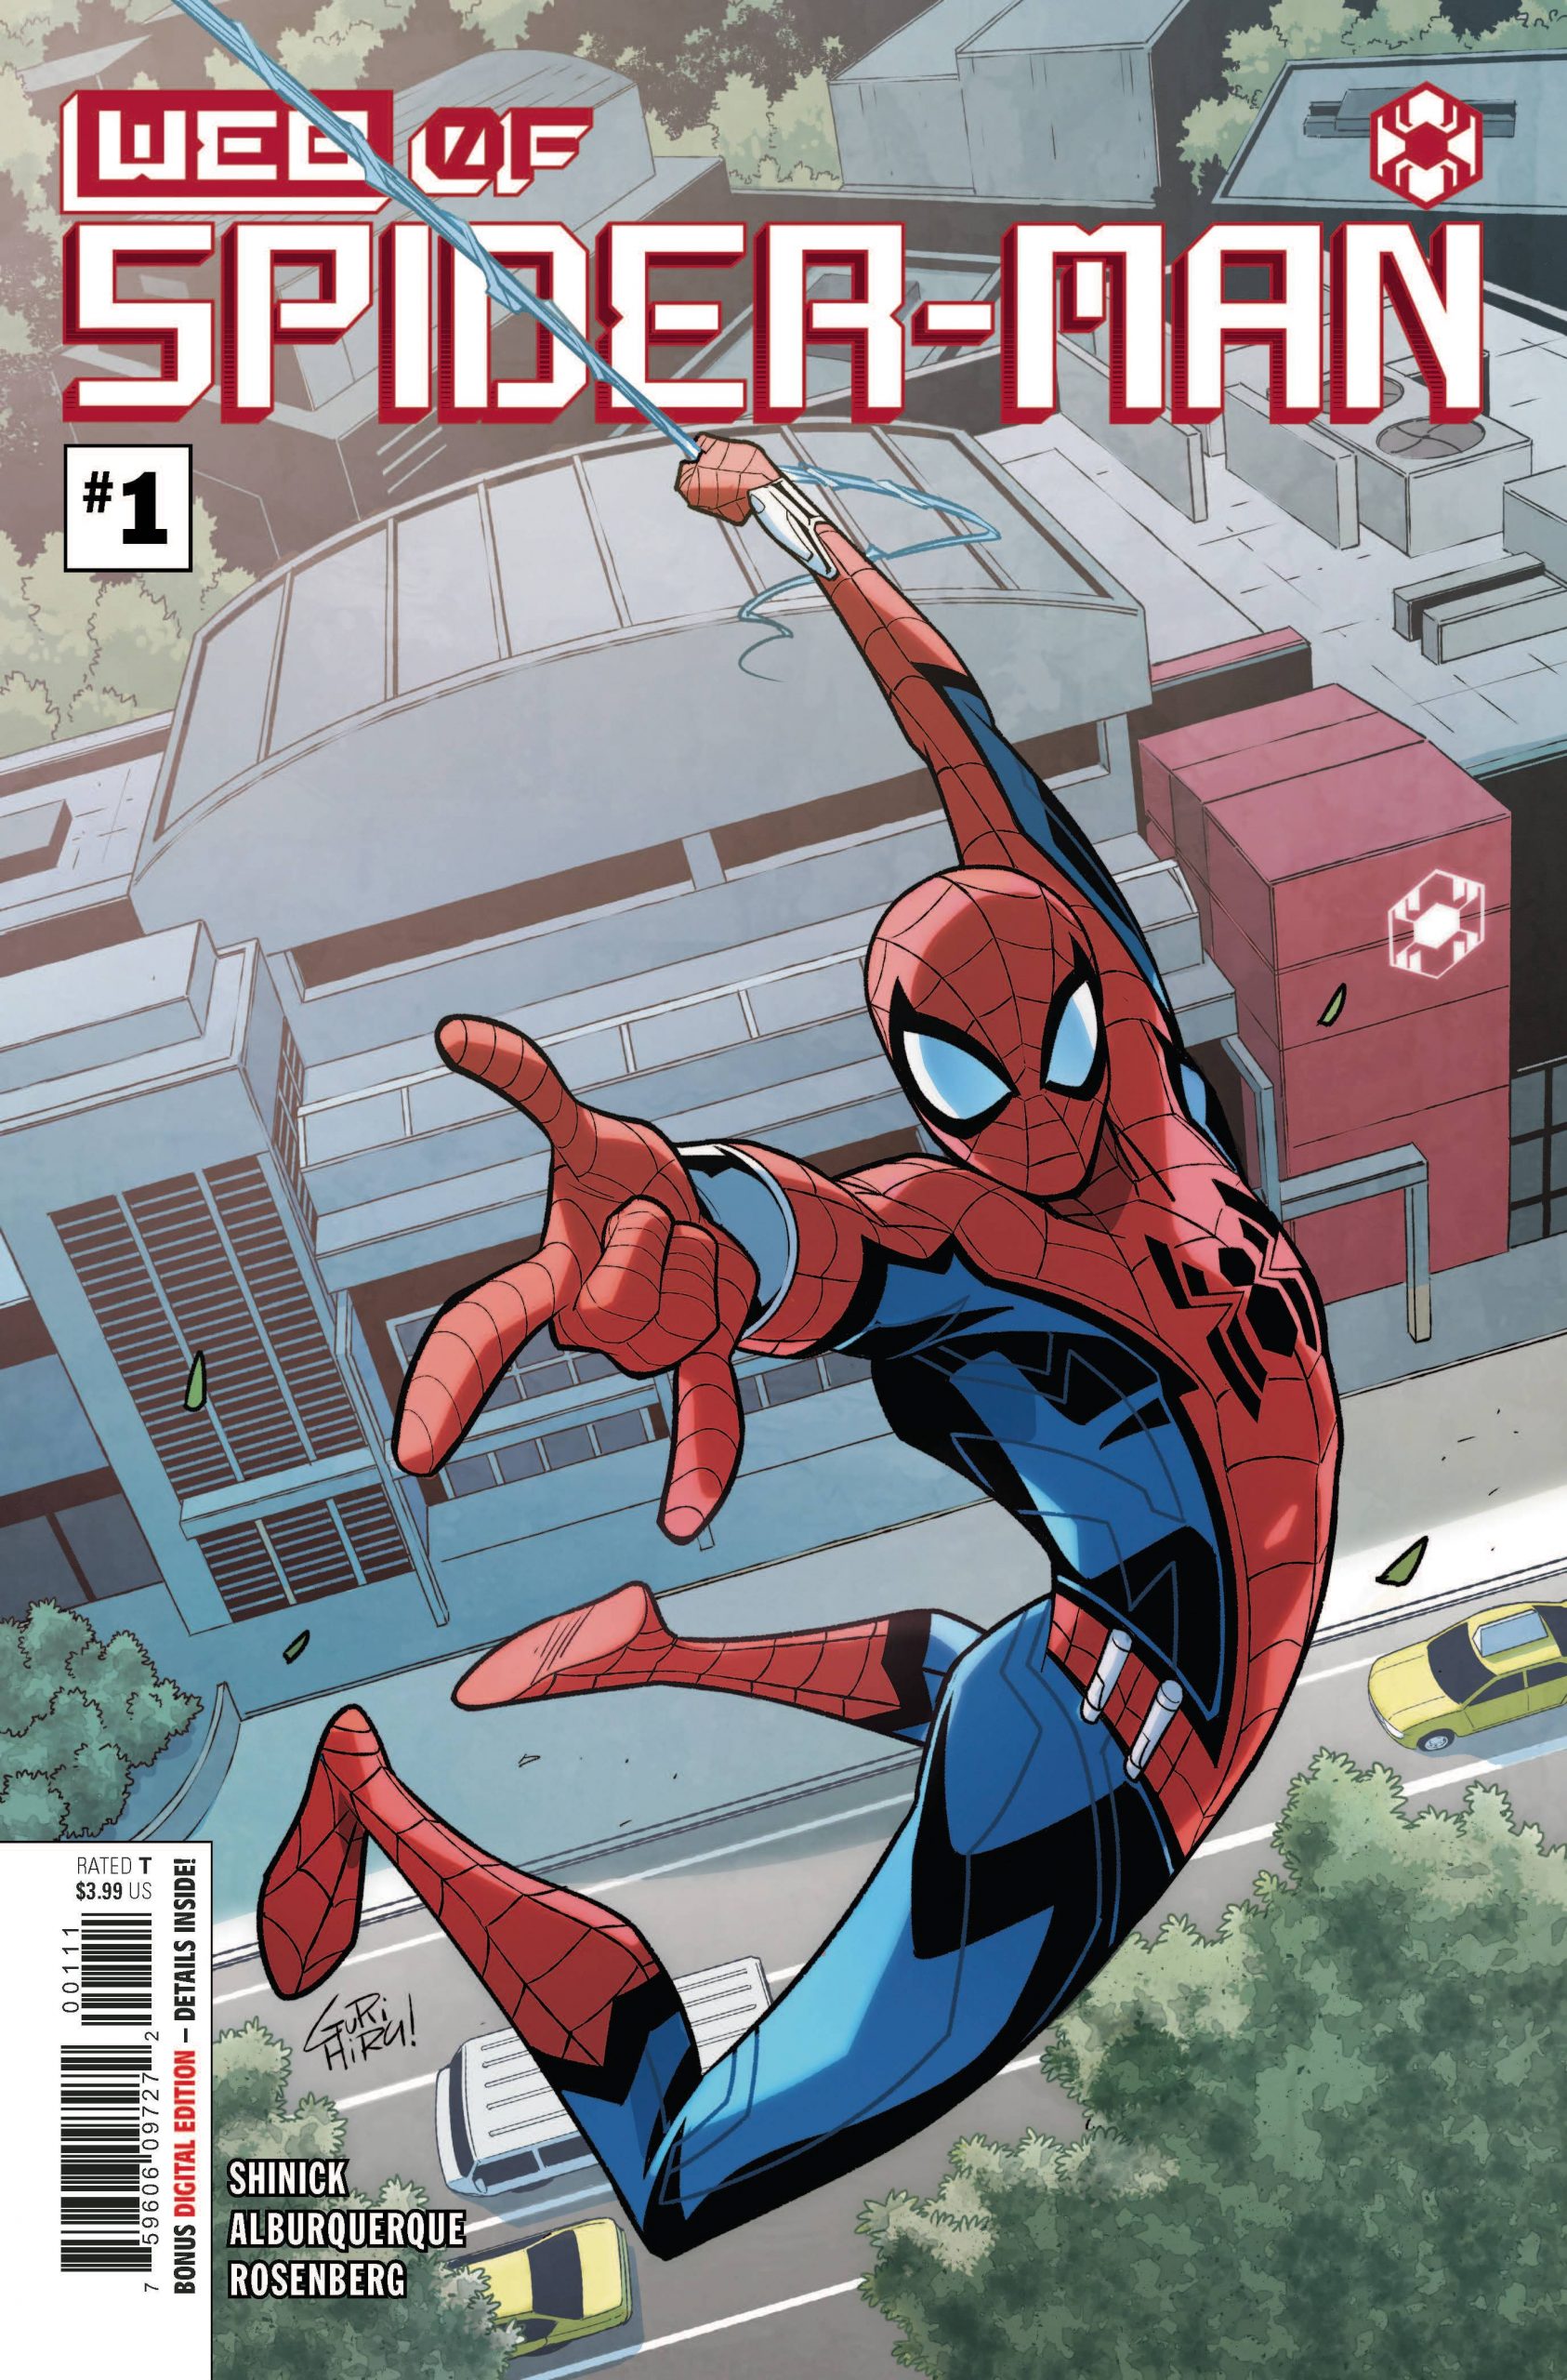 WEB OF SPIDER-MAN #1 (OF 5)